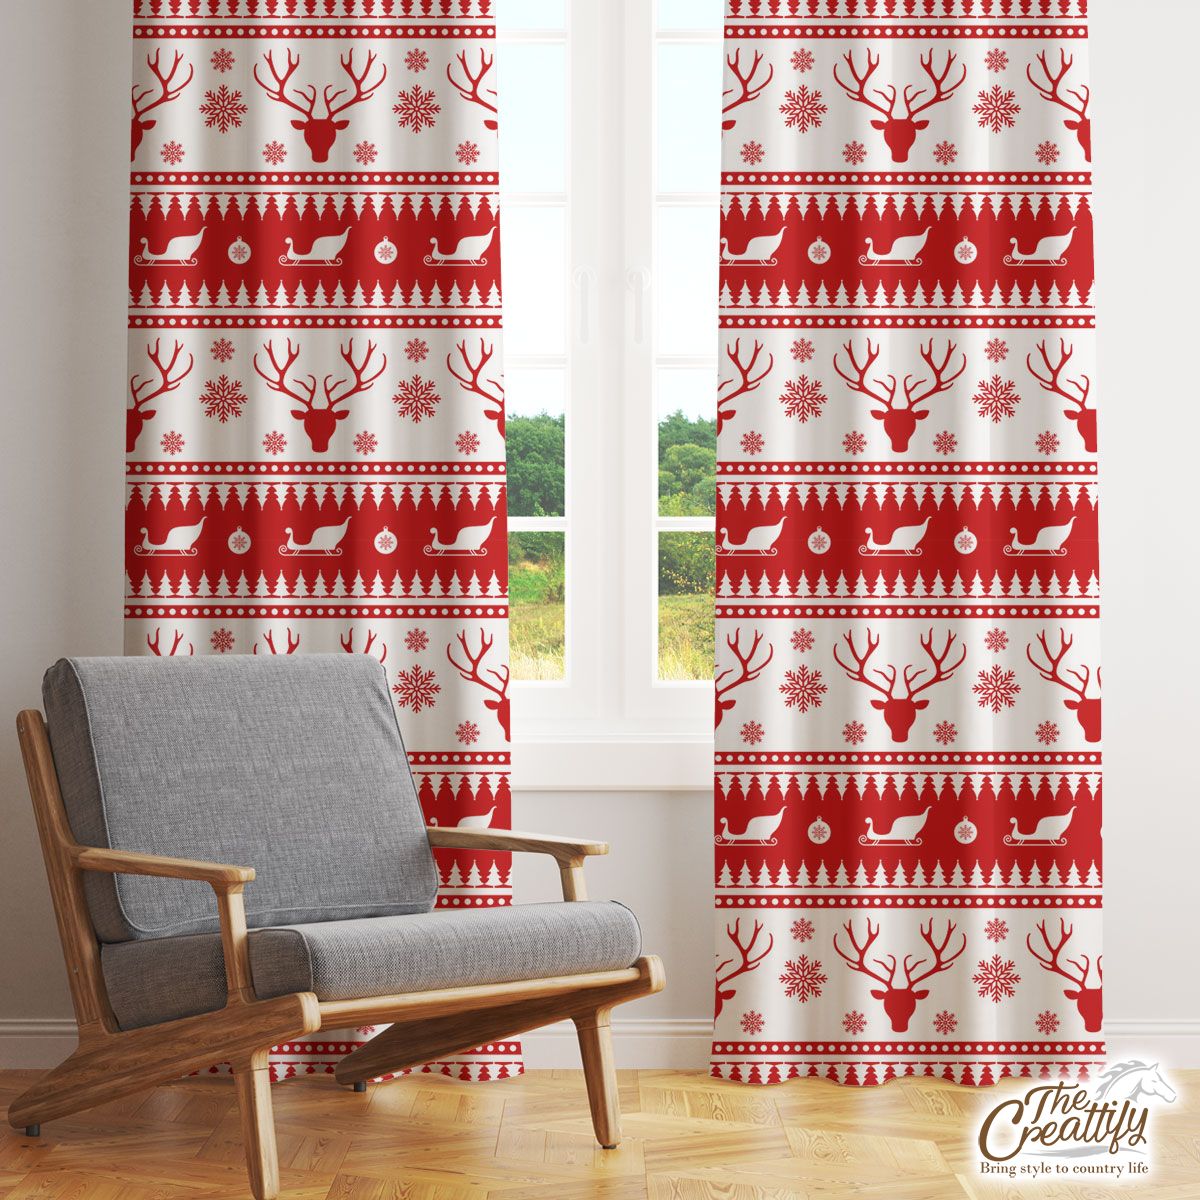 Red And White Reindeer, Santa Sleigh, Christmas Balls On The Snowflake Background Window Curtain